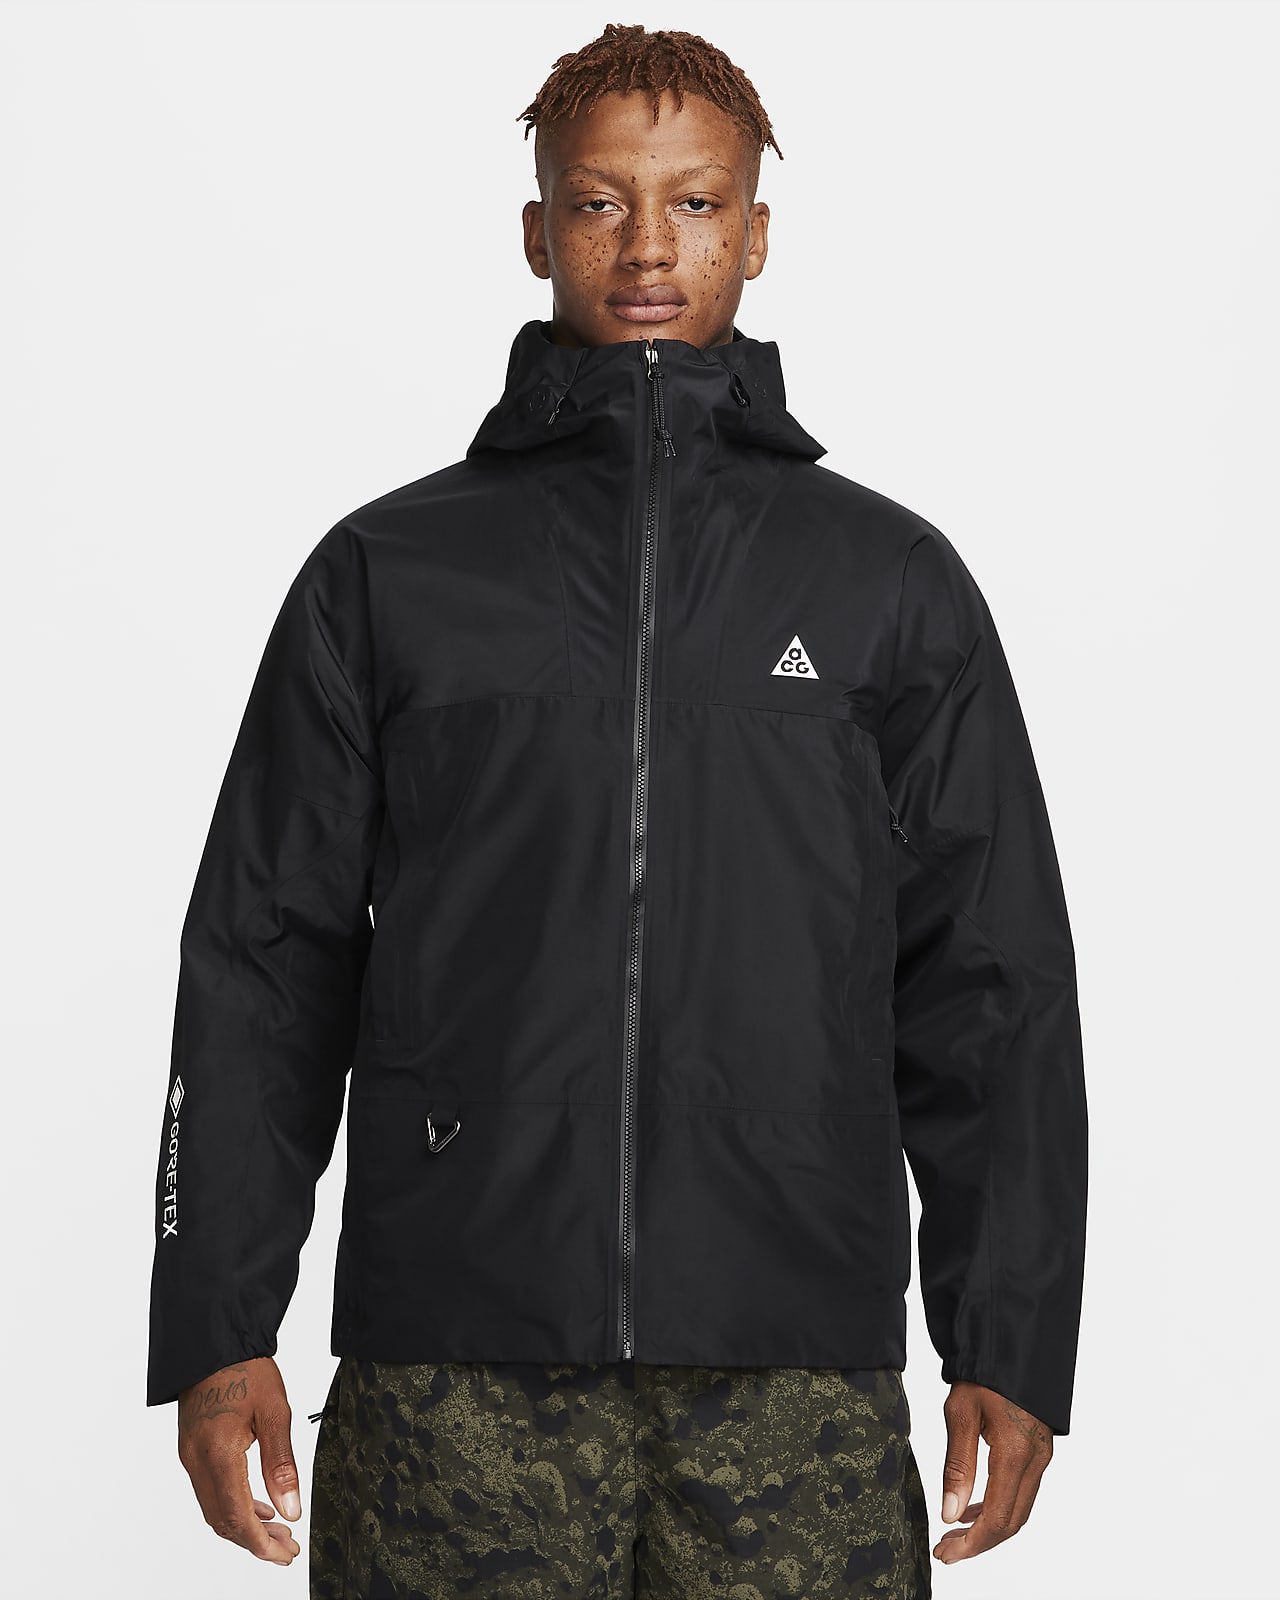 Veste Nike Storm-FIT ADV ACG « Chain of Craters » pour Homme